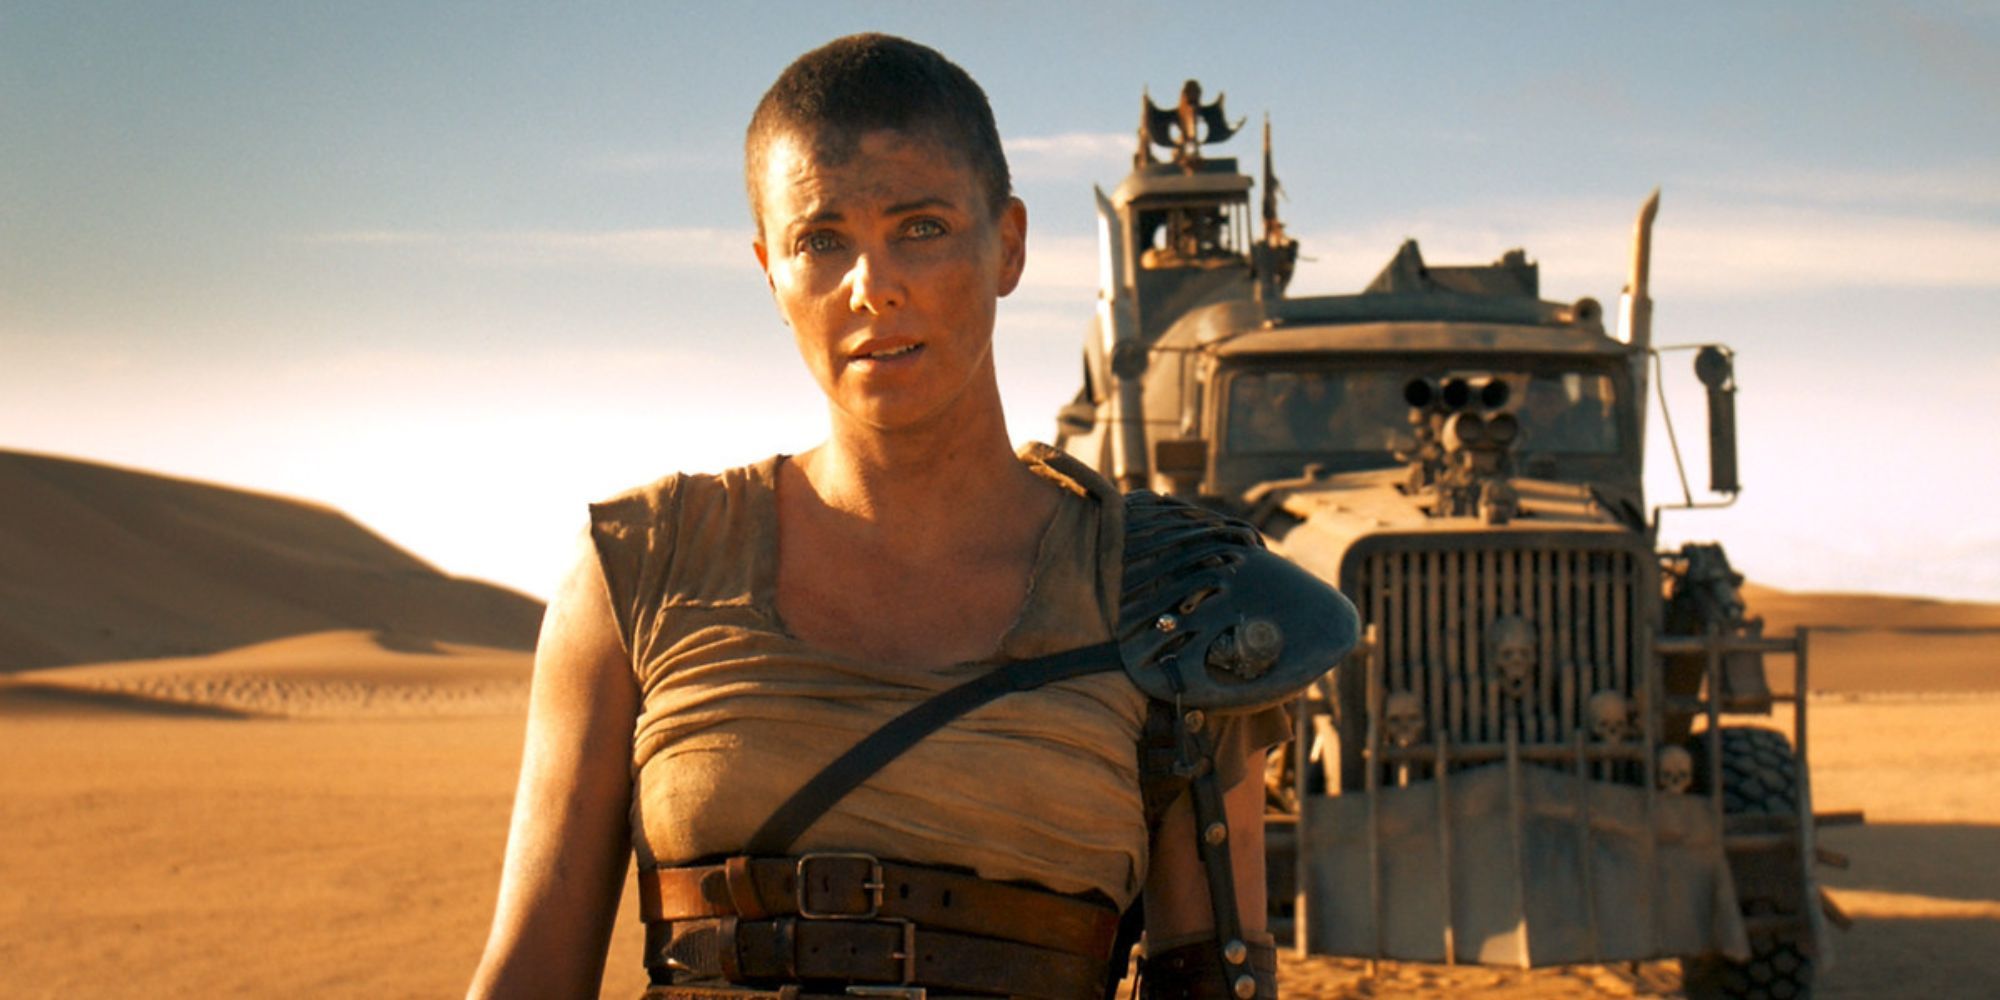 Furiosa stands in front of a truck in the desert